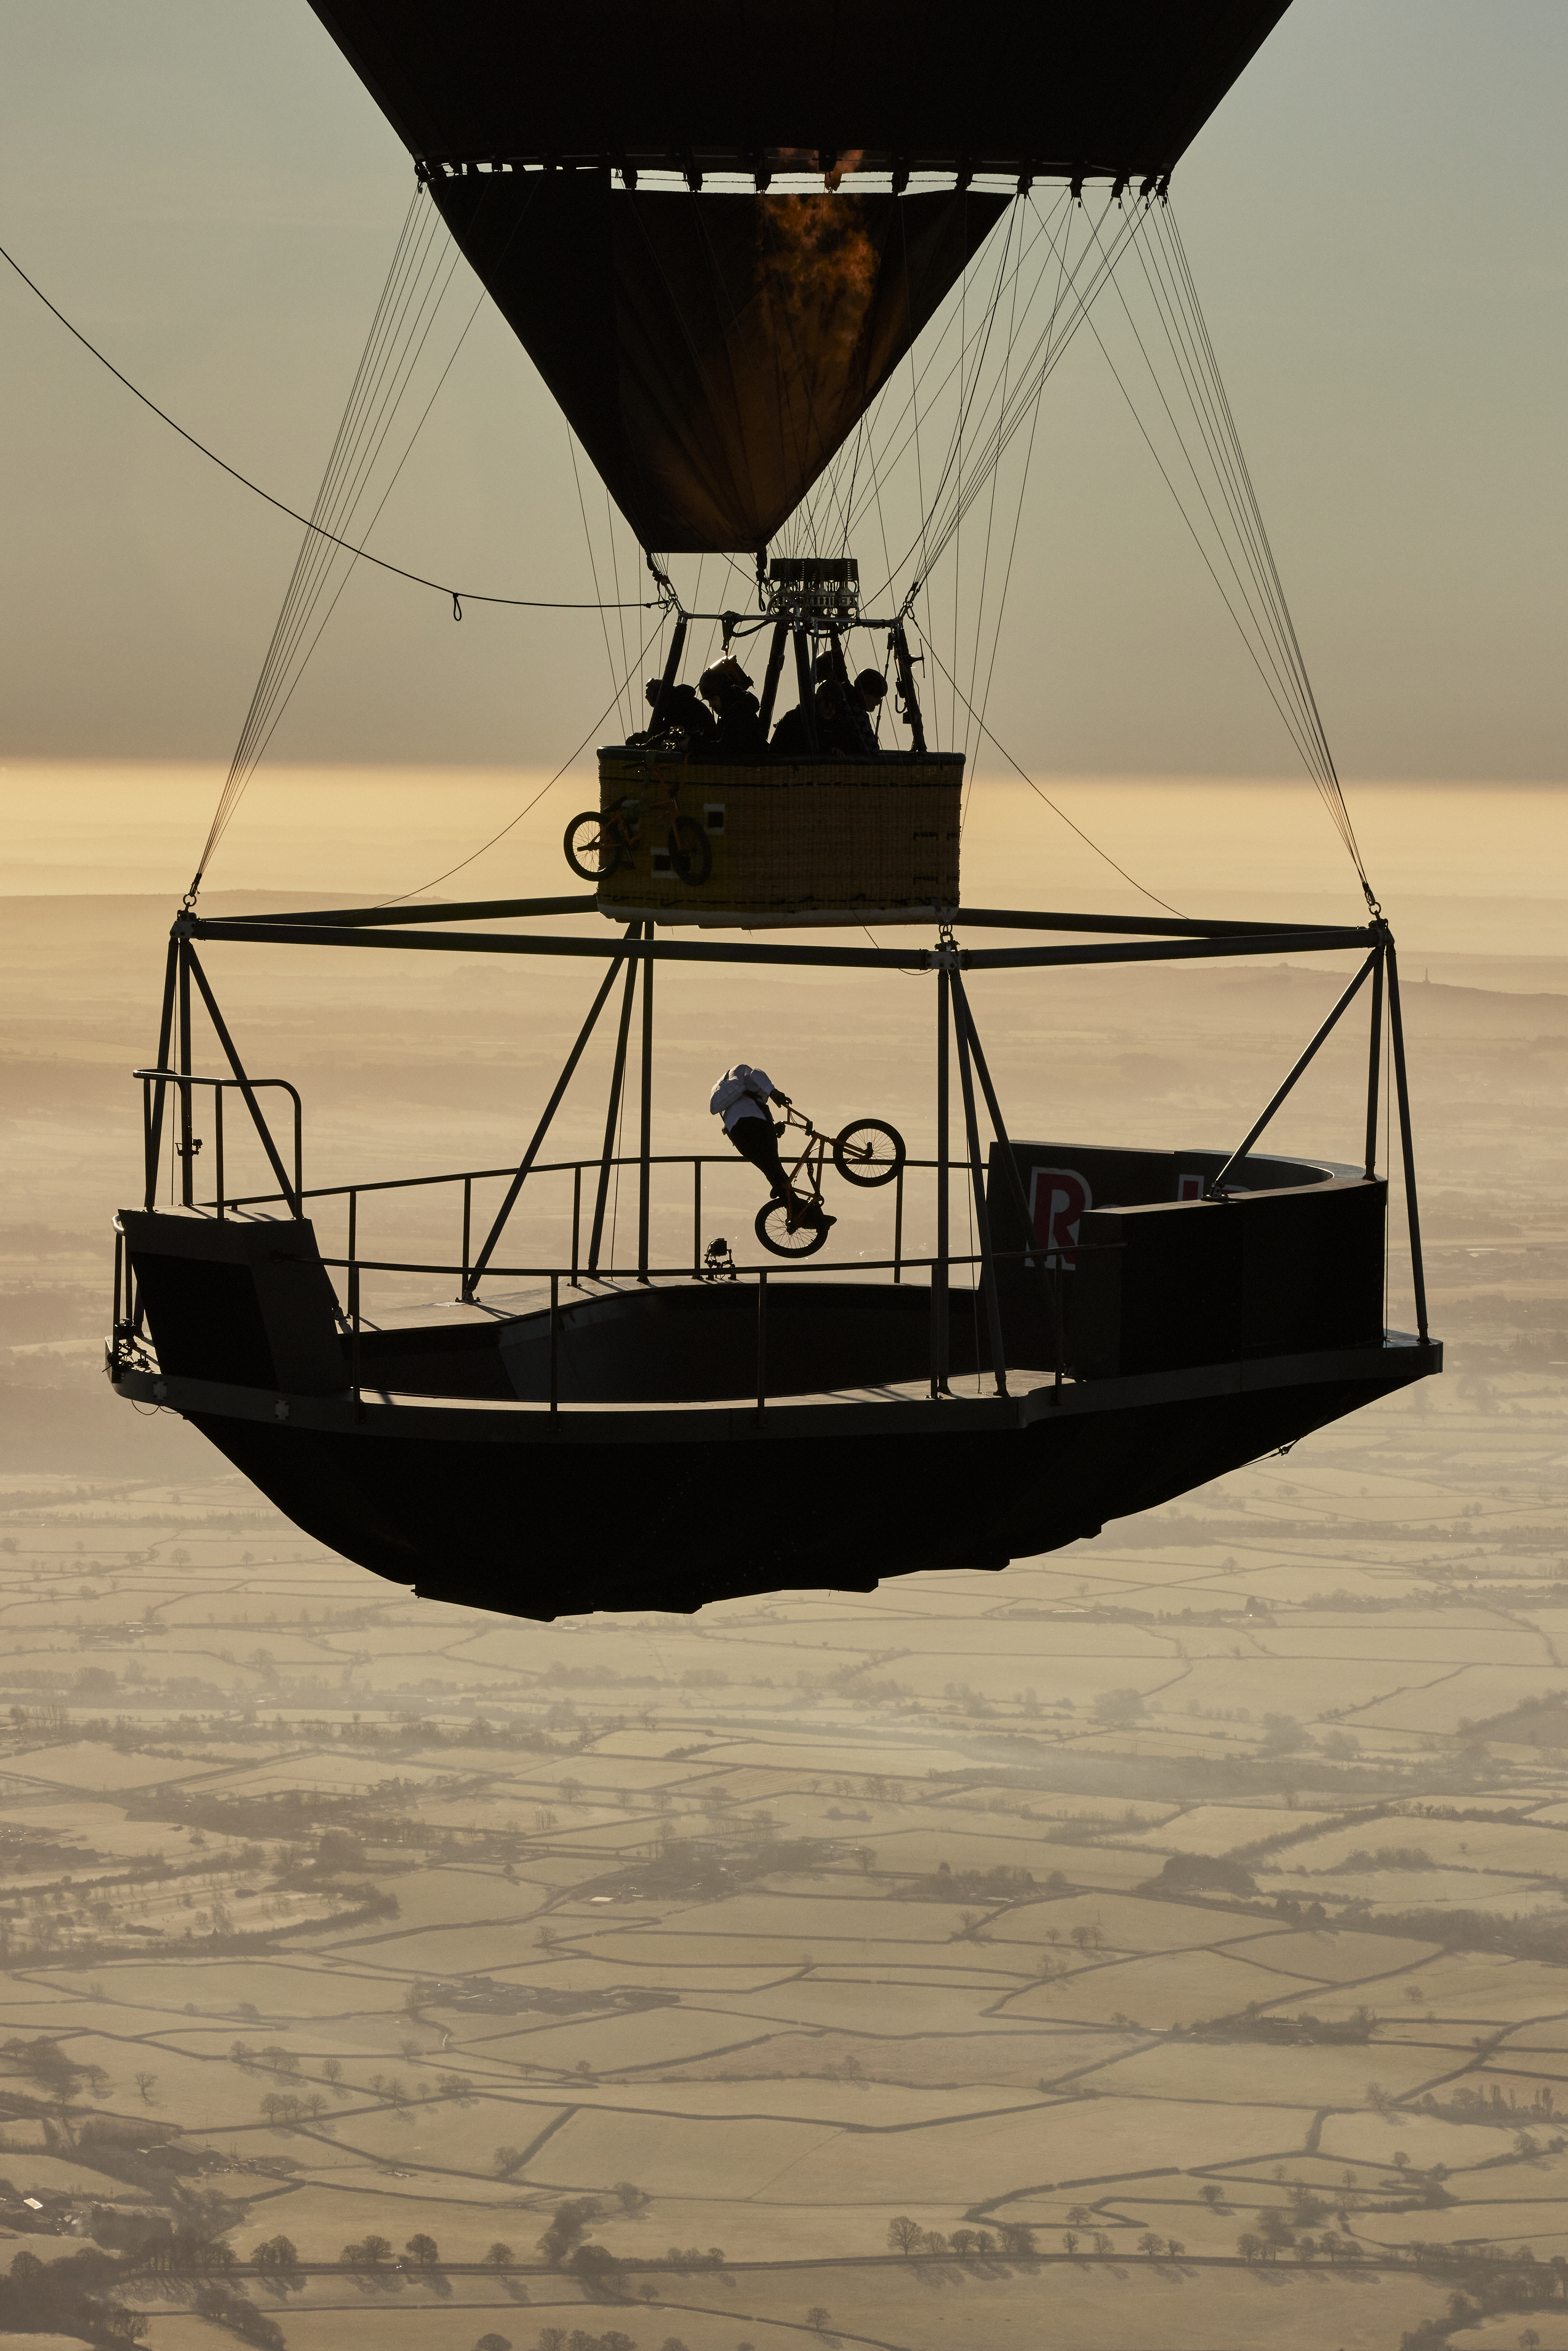 A BMX Athlete performs rides around a floating skatepark suspended 2,100 feet in the air by a large hot air balloon.